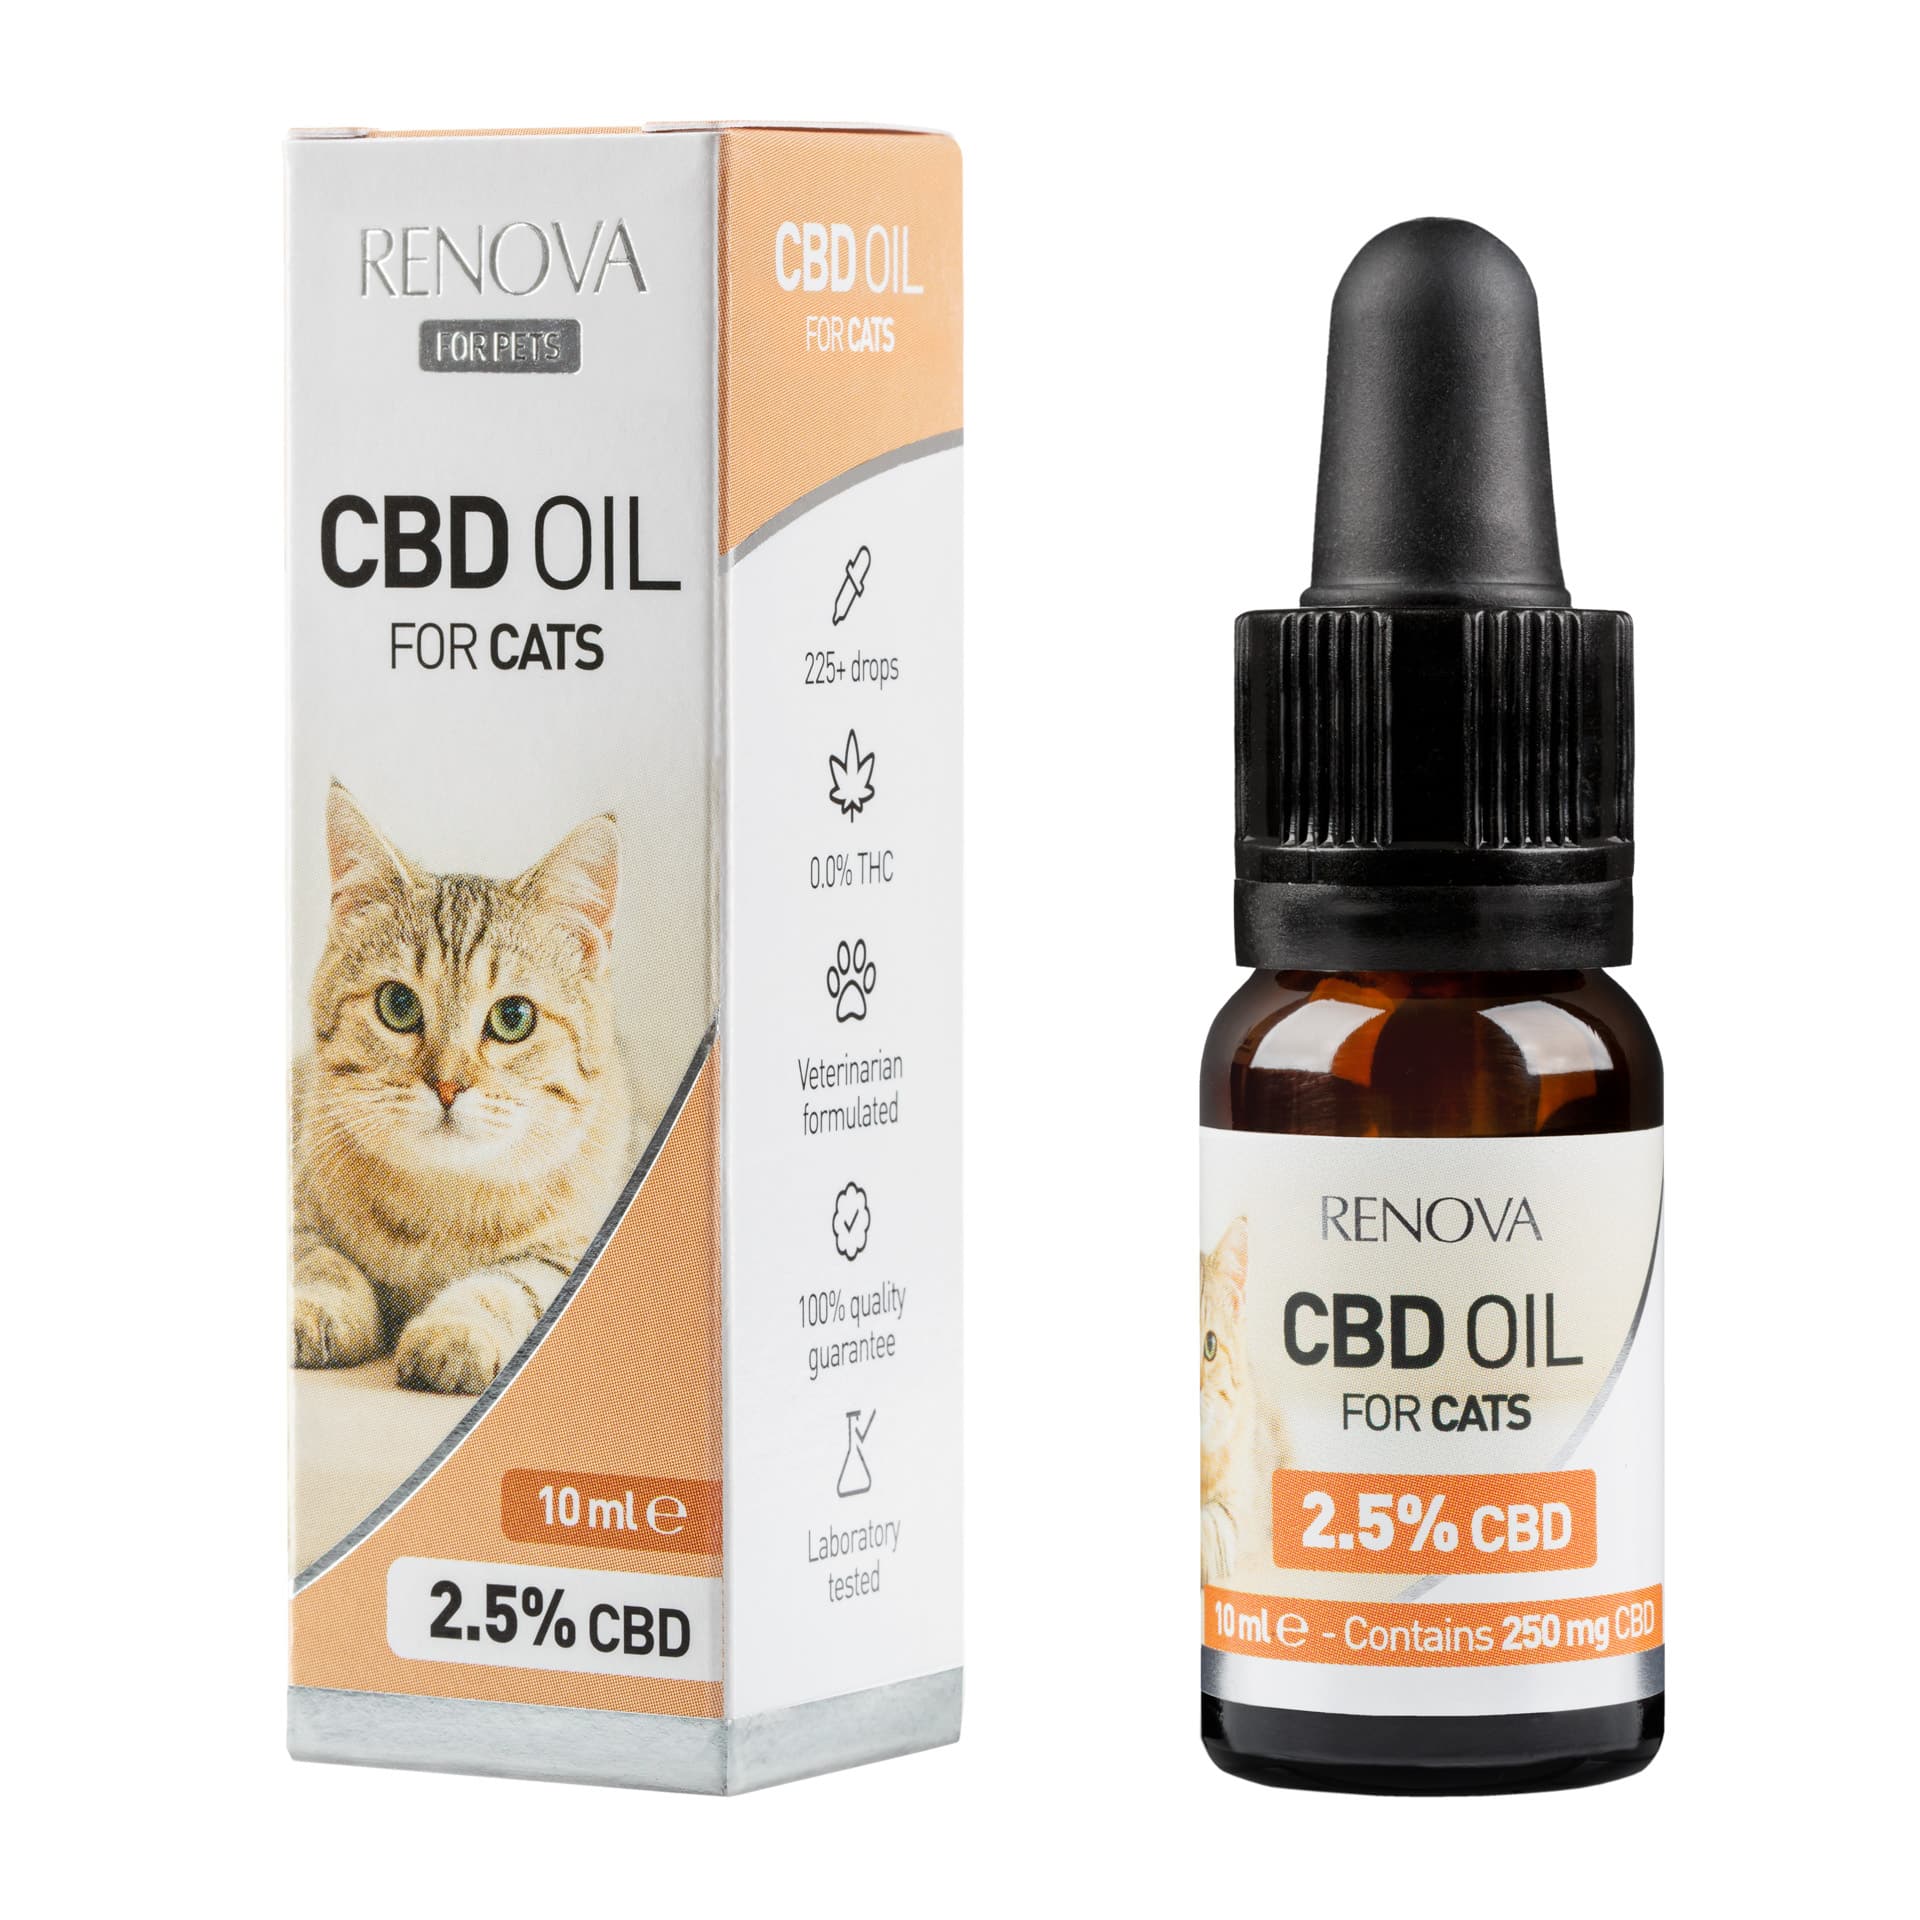 a bottle of Renova - CBD oil 2,5% for cats next to a box of Renova - CBD oil 2,5% for cats.